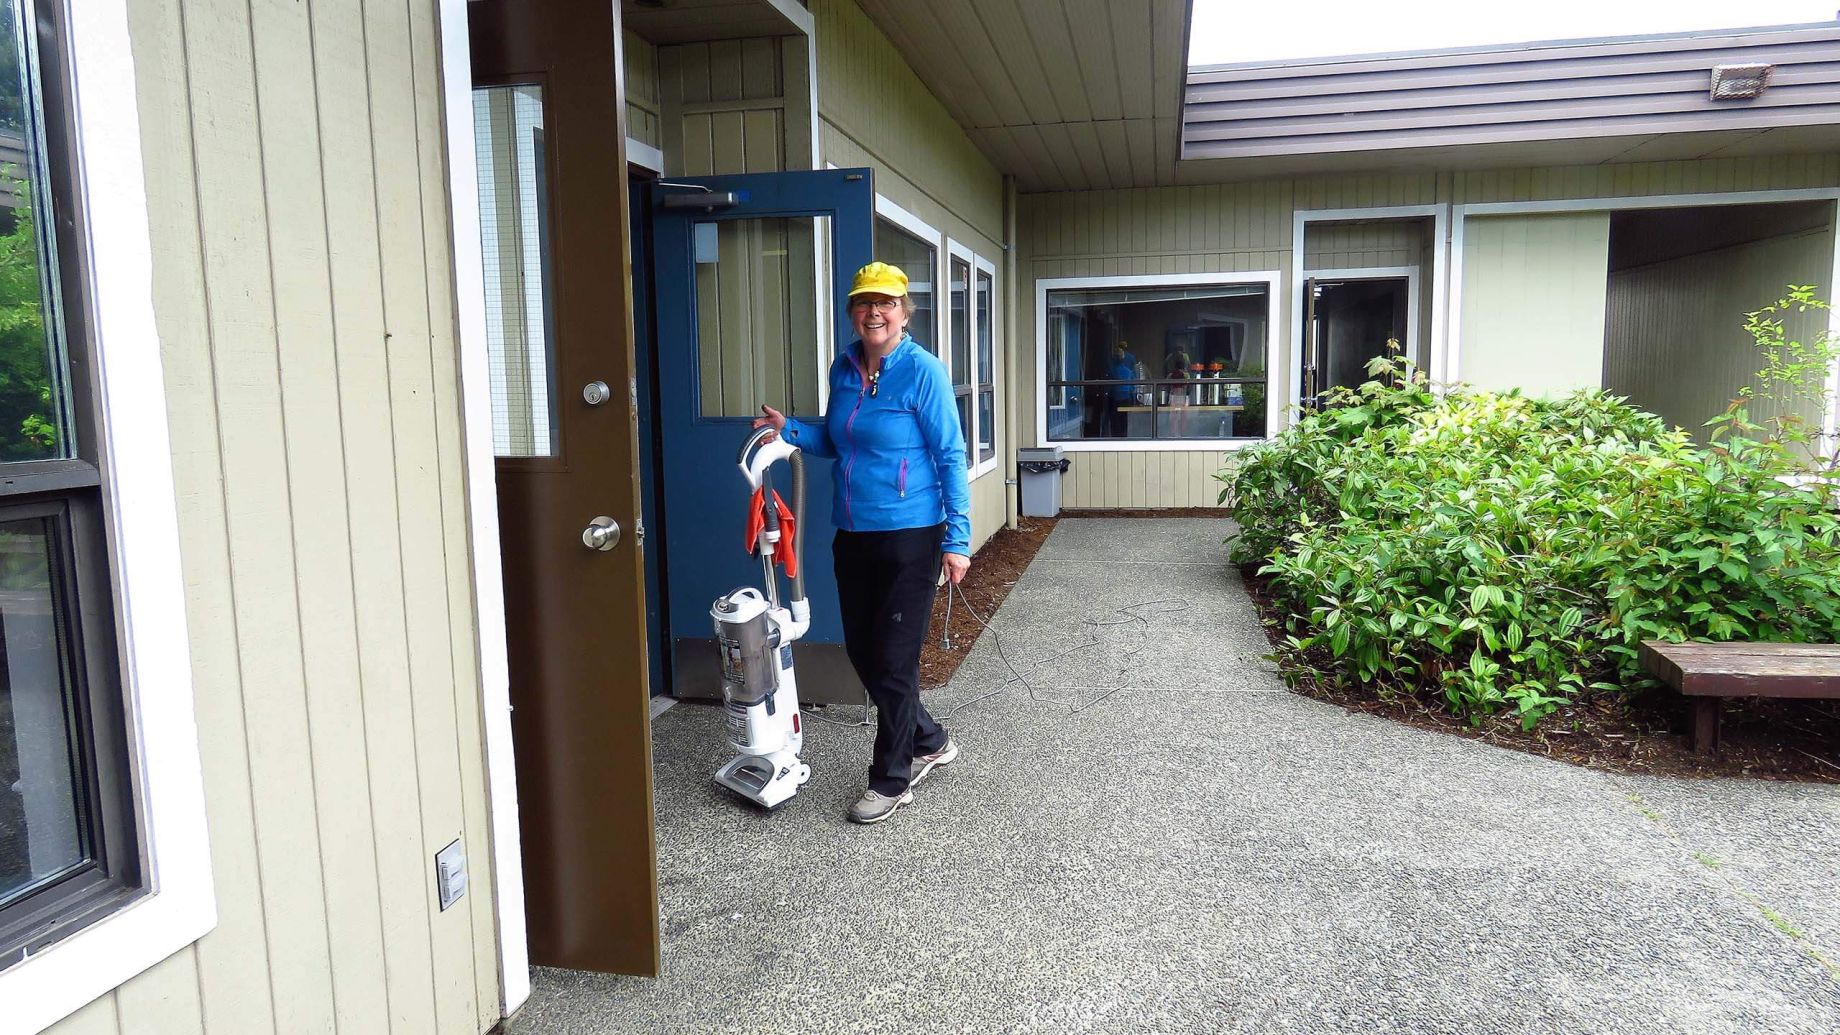 Parksville Community Centre volunteer smiling near the centre with vacuum cleaner